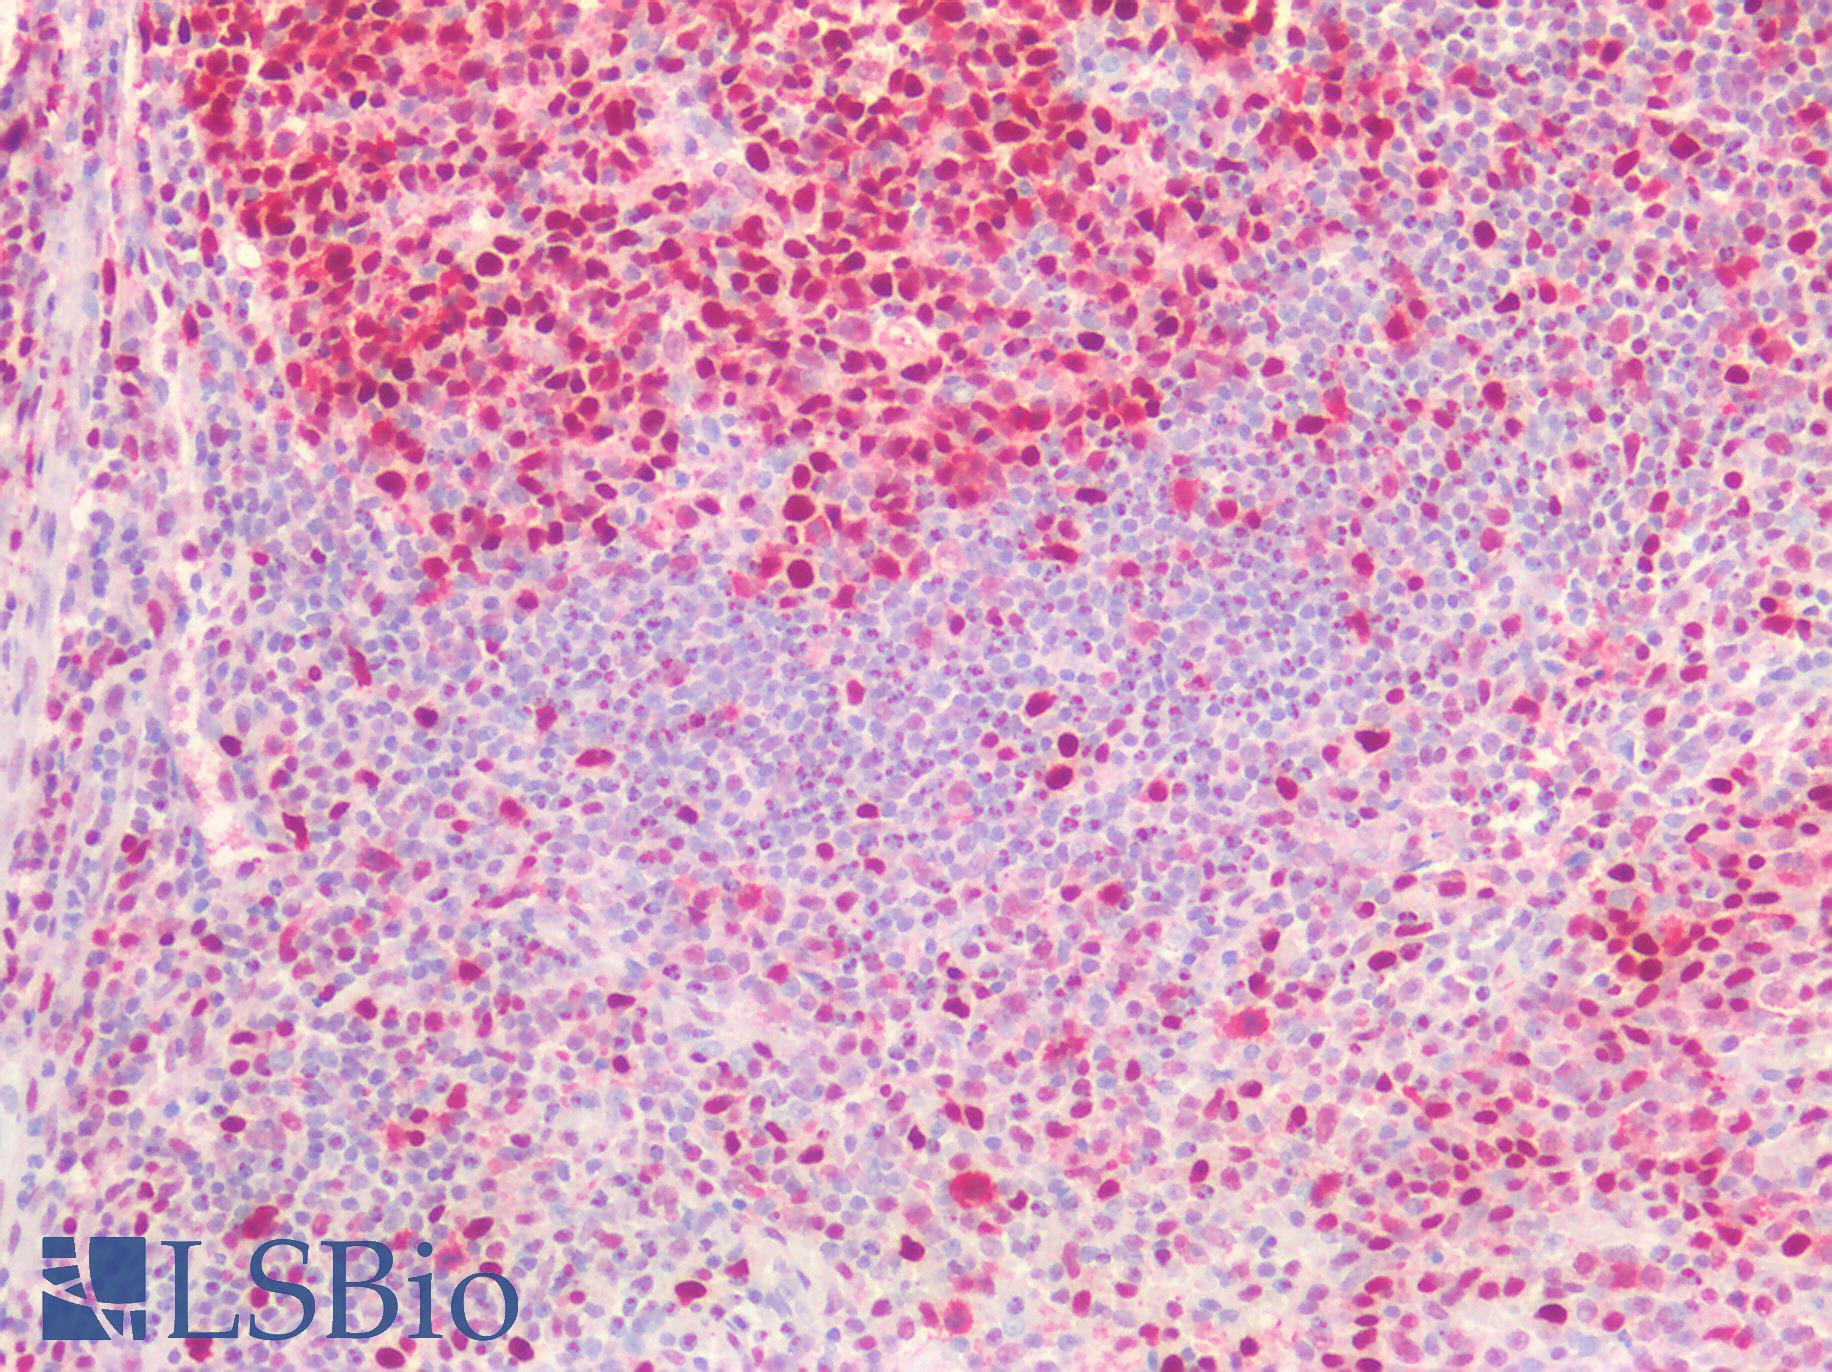 PCNA Antibody - Human Tonsil: Formalin-Fixed, Paraffin-Embedded (FFPE)